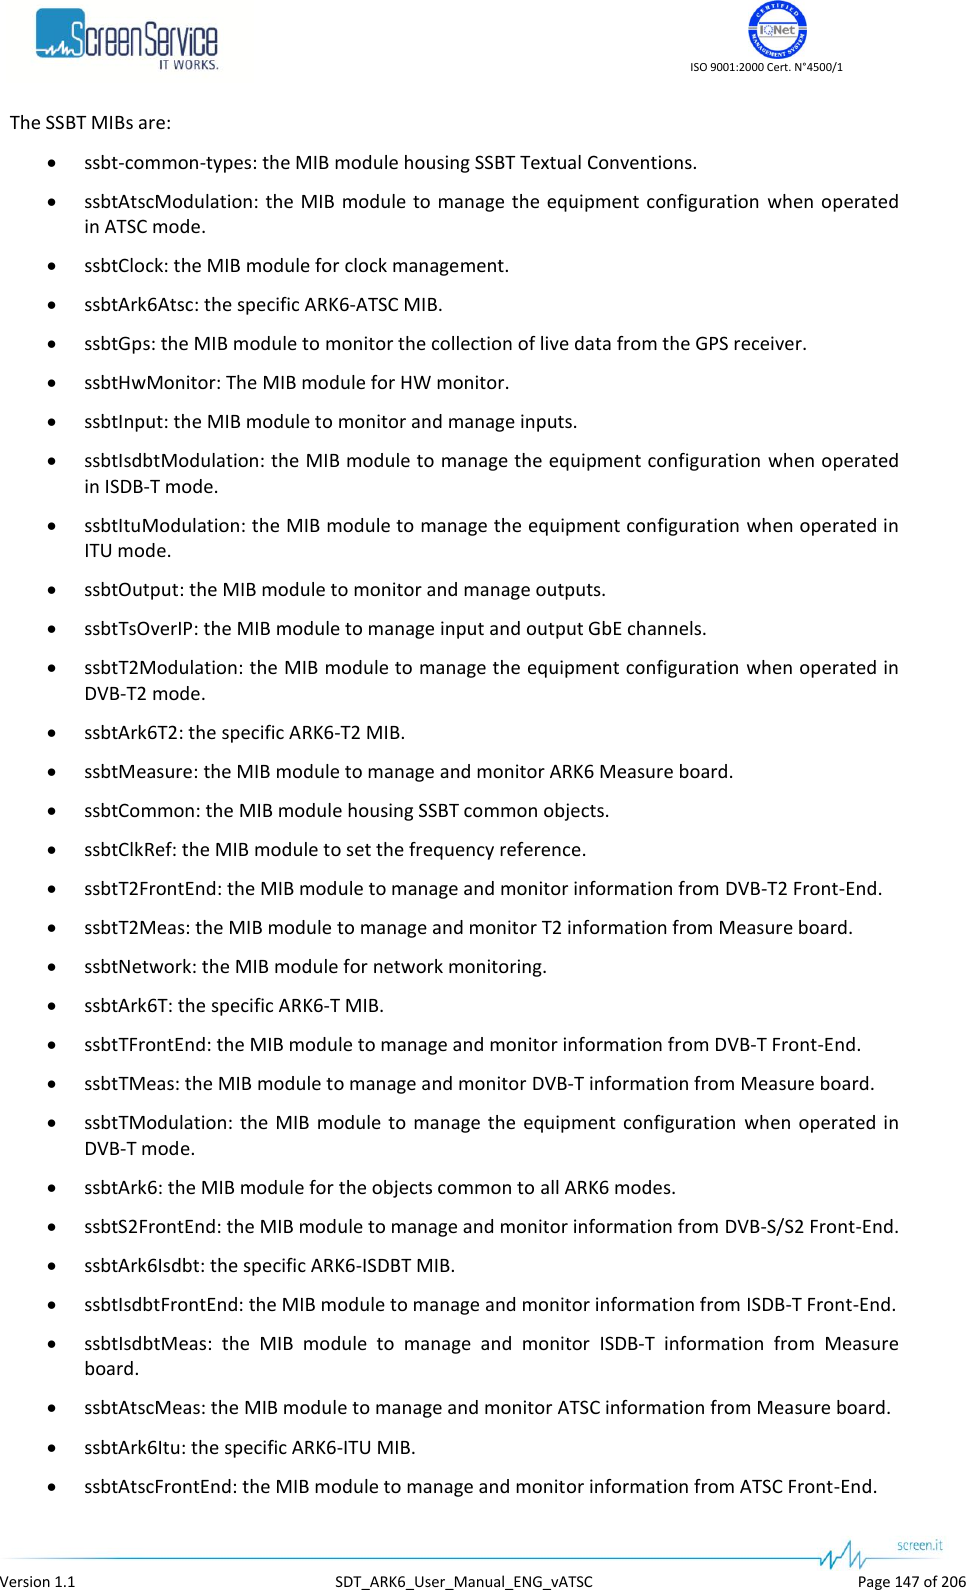    ISO 9001:2000 Cert. N°4500/1   Version 1.1  SDT_ARK6_User_Manual_ENG_vATSC  Page 147 of 206 The SSBT MIBs are:  ssbt-common-types: the MIB module housing SSBT Textual Conventions.  ssbtAtscModulation:  the MIB module to  manage the  equipment configuration when operated in ATSC mode.  ssbtClock: the MIB module for clock management.  ssbtArk6Atsc: the specific ARK6-ATSC MIB.  ssbtGps: the MIB module to monitor the collection of live data from the GPS receiver.  ssbtHwMonitor: The MIB module for HW monitor.  ssbtInput: the MIB module to monitor and manage inputs.  ssbtIsdbtModulation: the MIB module to manage the equipment configuration when operated in ISDB-T mode.  ssbtItuModulation: the MIB module to manage the equipment configuration when operated in ITU mode.  ssbtOutput: the MIB module to monitor and manage outputs.  ssbtTsOverIP: the MIB module to manage input and output GbE channels.  ssbtT2Modulation: the MIB module to manage the equipment configuration when operated in DVB-T2 mode.  ssbtArk6T2: the specific ARK6-T2 MIB.  ssbtMeasure: the MIB module to manage and monitor ARK6 Measure board.  ssbtCommon: the MIB module housing SSBT common objects.  ssbtClkRef: the MIB module to set the frequency reference.  ssbtT2FrontEnd: the MIB module to manage and monitor information from DVB-T2 Front-End.  ssbtT2Meas: the MIB module to manage and monitor T2 information from Measure board.  ssbtNetwork: the MIB module for network monitoring.  ssbtArk6T: the specific ARK6-T MIB.  ssbtTFrontEnd: the MIB module to manage and monitor information from DVB-T Front-End.  ssbtTMeas: the MIB module to manage and monitor DVB-T information from Measure board.  ssbtTModulation:  the  MIB module to manage  the  equipment  configuration  when  operated  in DVB-T mode.  ssbtArk6: the MIB module for the objects common to all ARK6 modes.  ssbtS2FrontEnd: the MIB module to manage and monitor information from DVB-S/S2 Front-End.  ssbtArk6Isdbt: the specific ARK6-ISDBT MIB.  ssbtIsdbtFrontEnd: the MIB module to manage and monitor information from ISDB-T Front-End.  ssbtIsdbtMeas:  the  MIB  module  to  manage  and  monitor  ISDB-T  information  from  Measure board.  ssbtAtscMeas: the MIB module to manage and monitor ATSC information from Measure board.  ssbtArk6Itu: the specific ARK6-ITU MIB.  ssbtAtscFrontEnd: the MIB module to manage and monitor information from ATSC Front-End. 